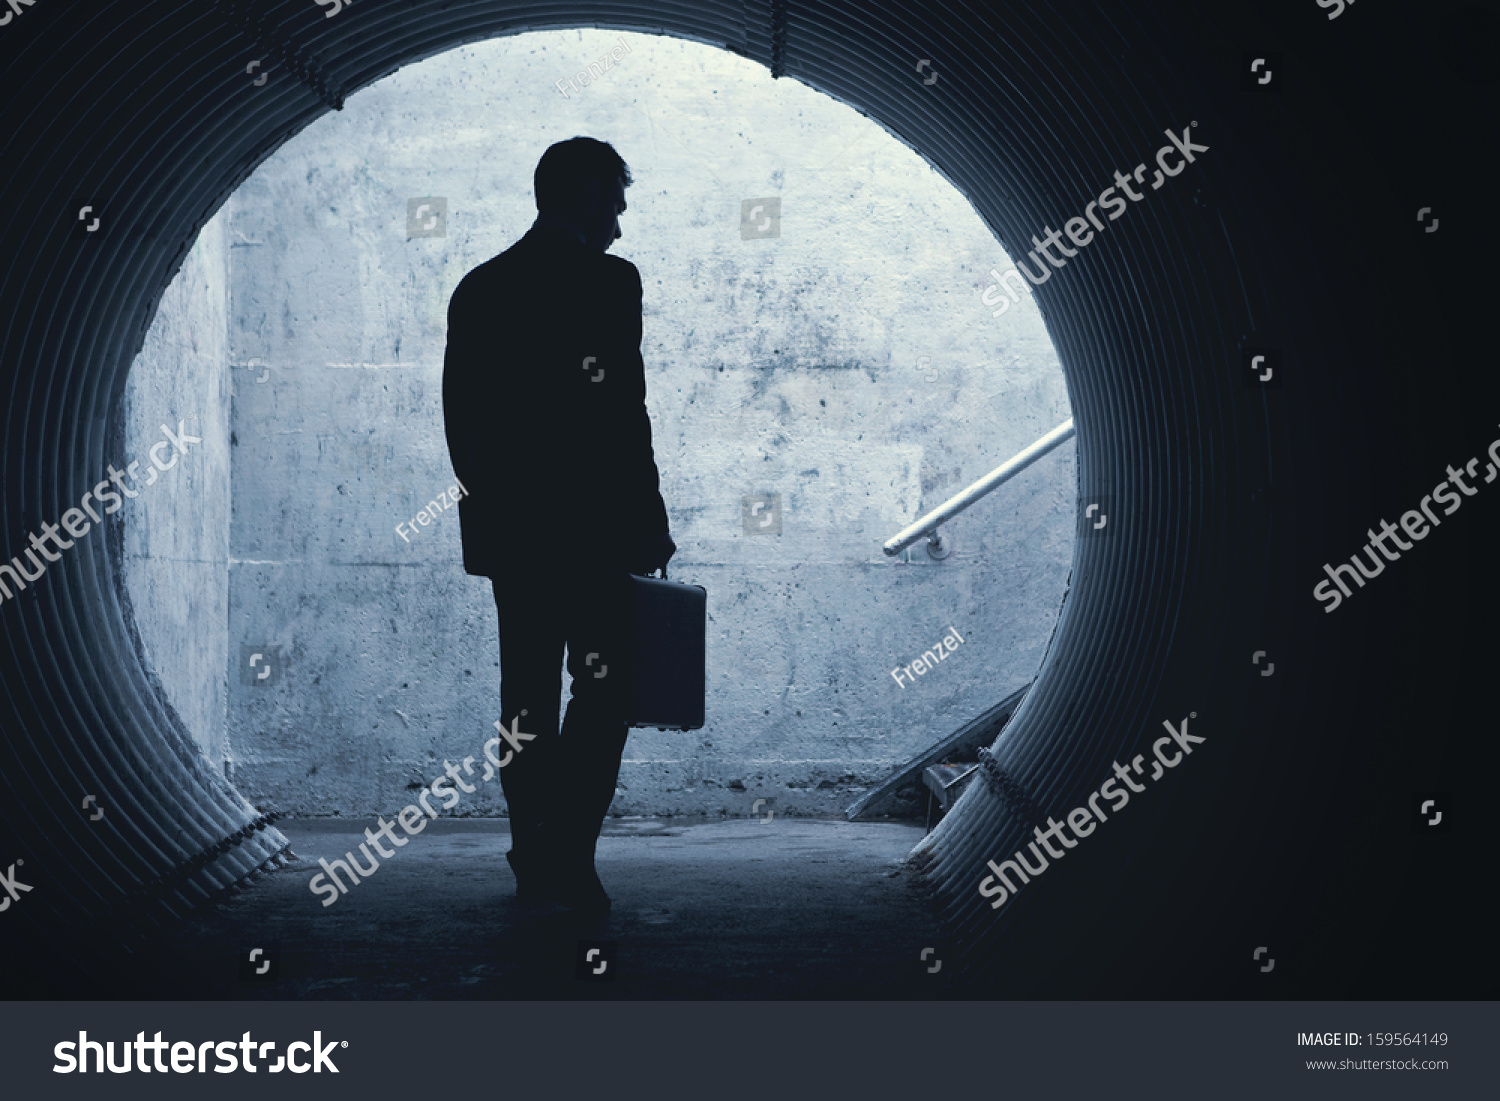 Businessman In Silhouette Walking In A Dark Tunnel. With Room For Your ... Silhouette Man Walking Tunnel